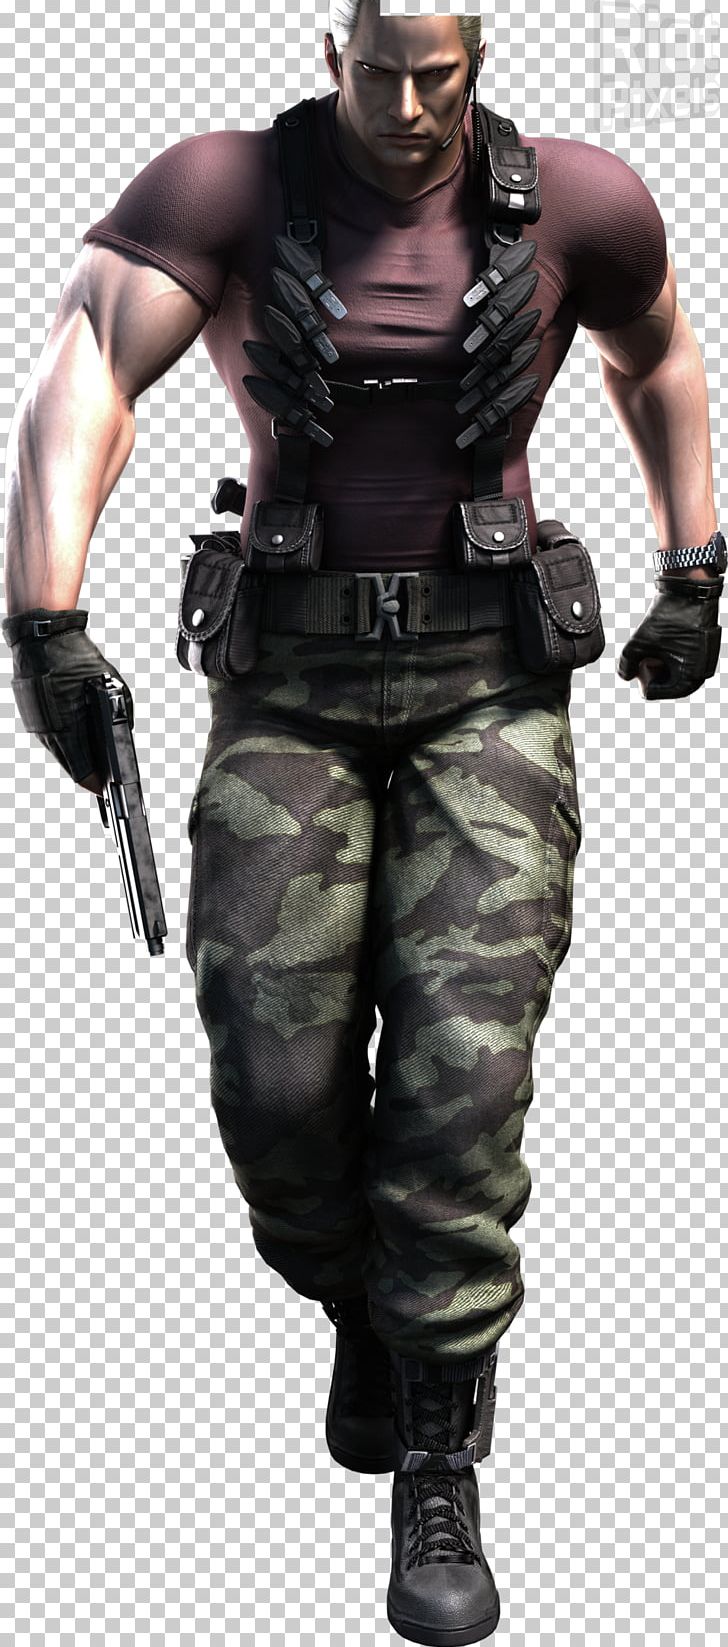 Resident Evil 4 Resident Evil: The Darkside Chronicles Resident Evil 6 Resident Evil 5 Leon S. Kennedy PNG, Clipart, Action Figure, Aggression, Claire Redfield, Muscle, Resident Evil Free PNG Download